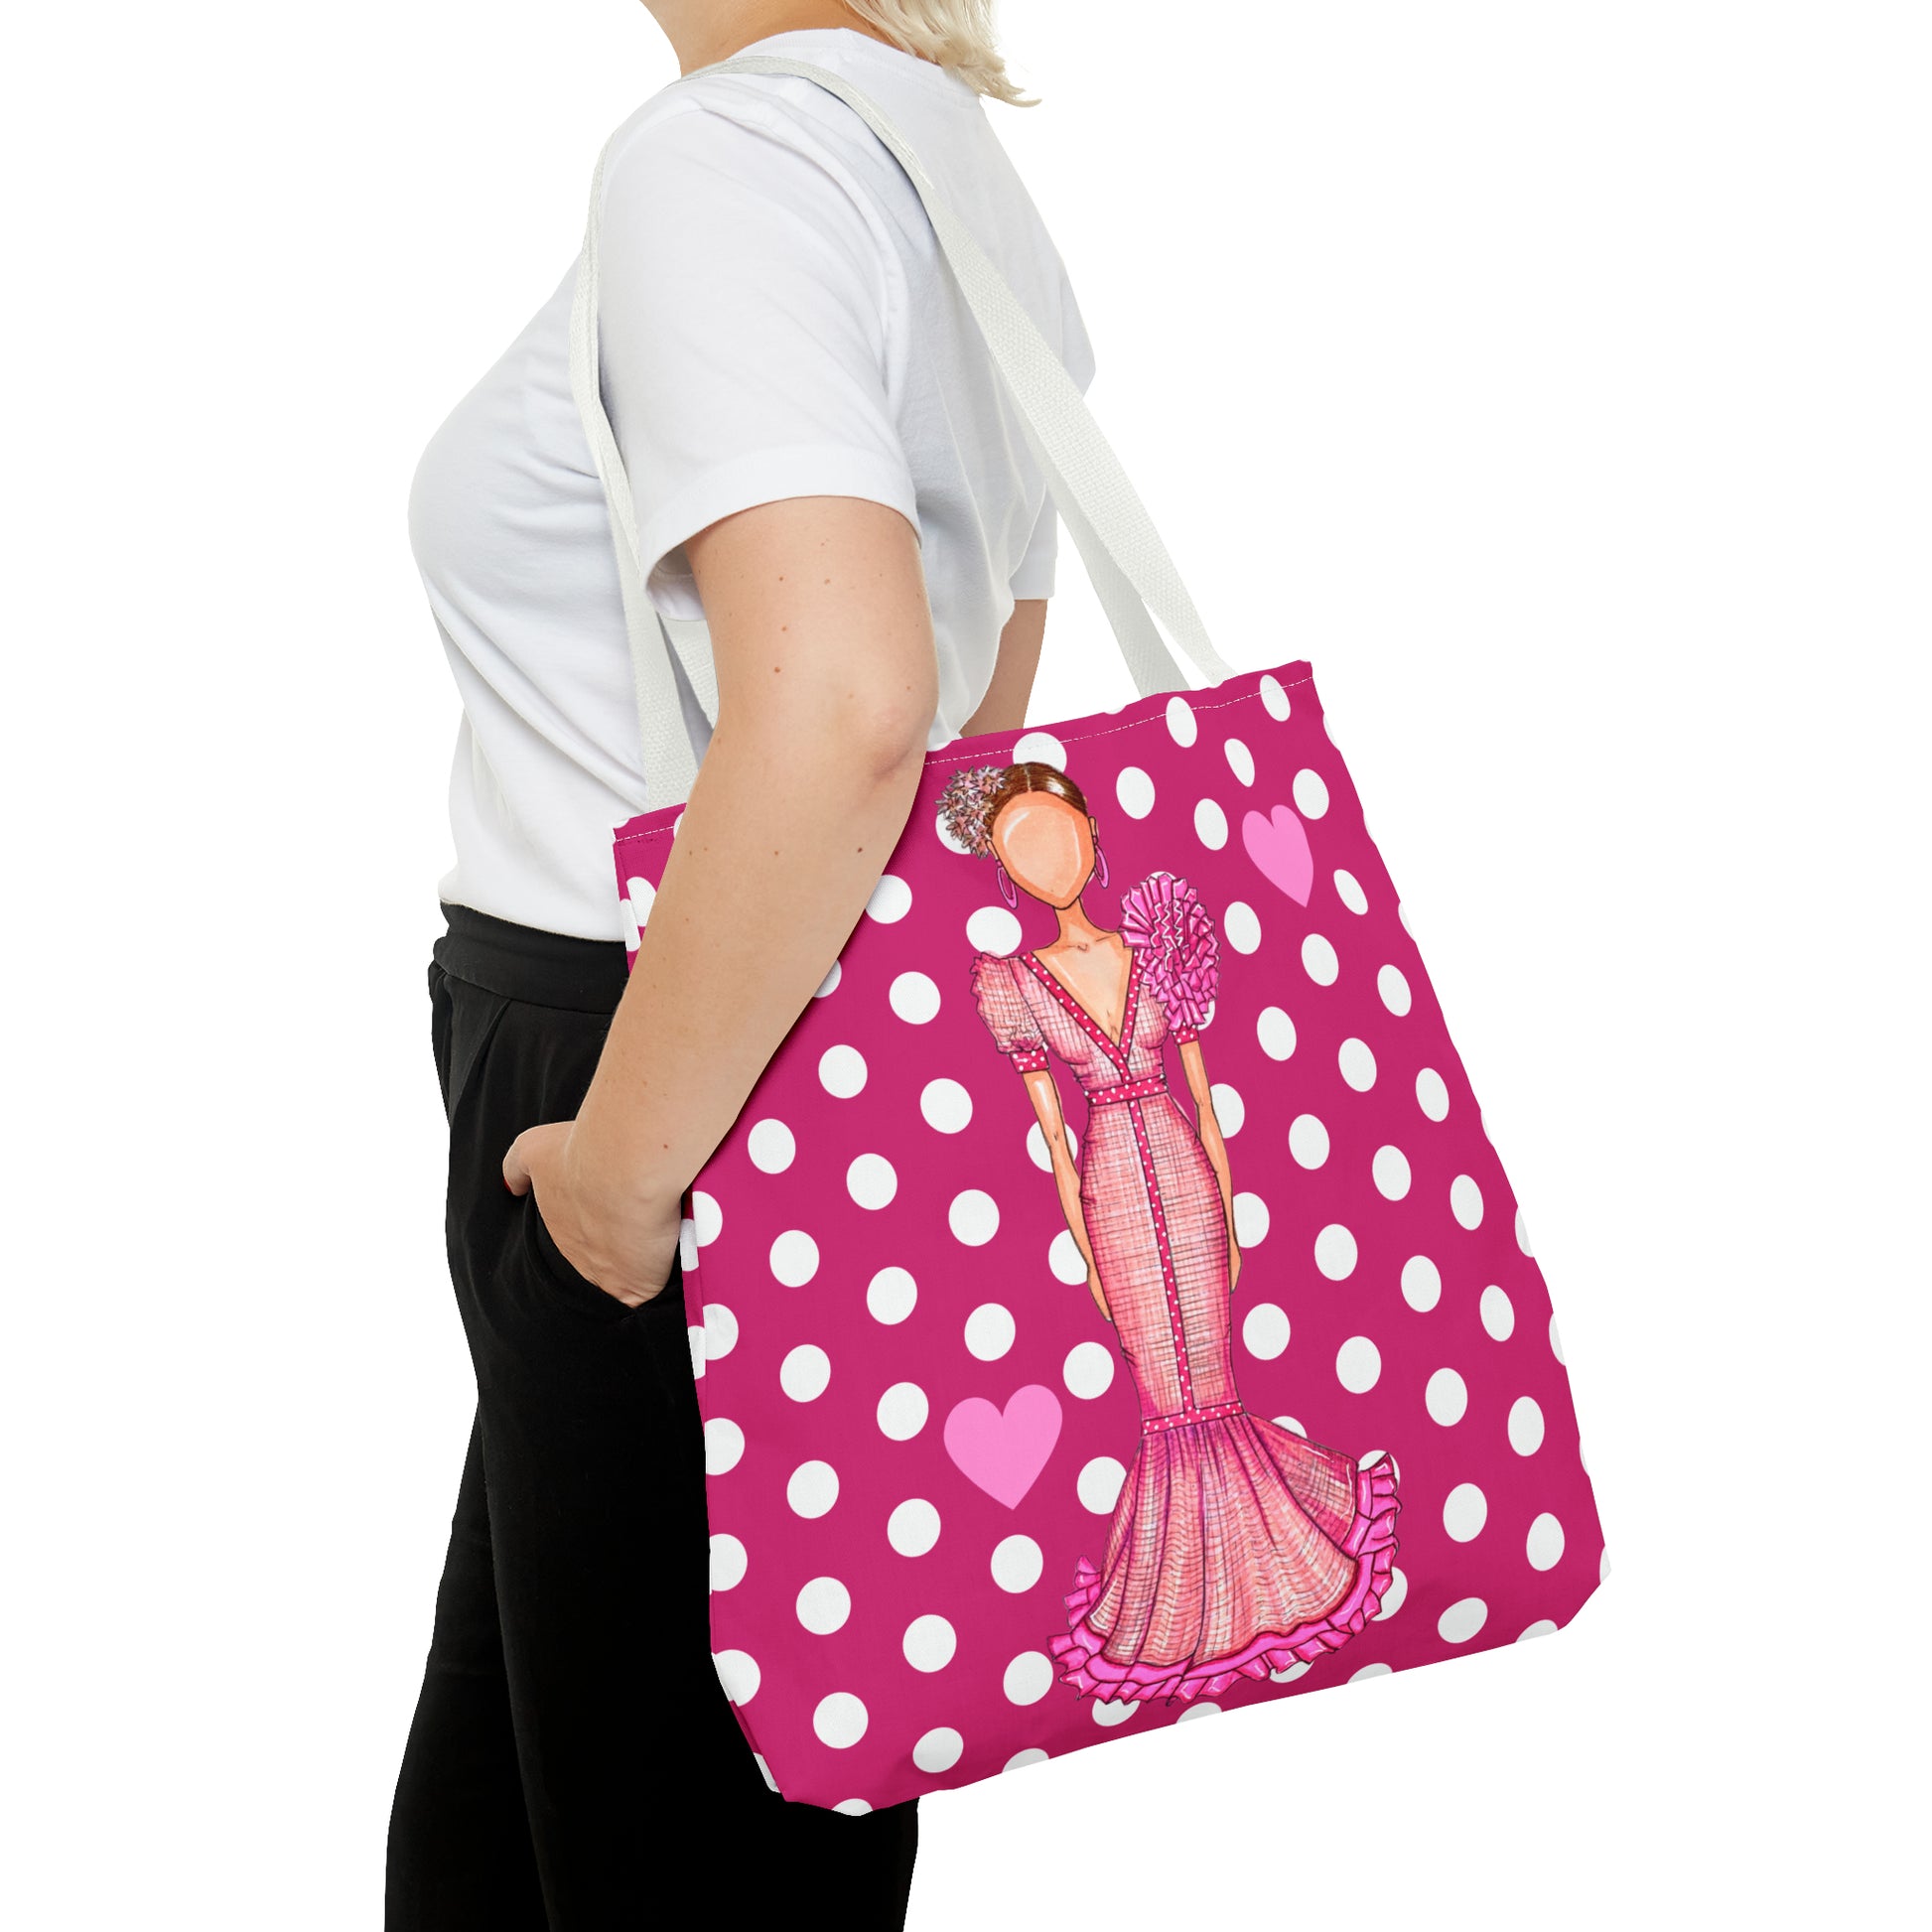 a woman carrying a pink and white polka dot bag